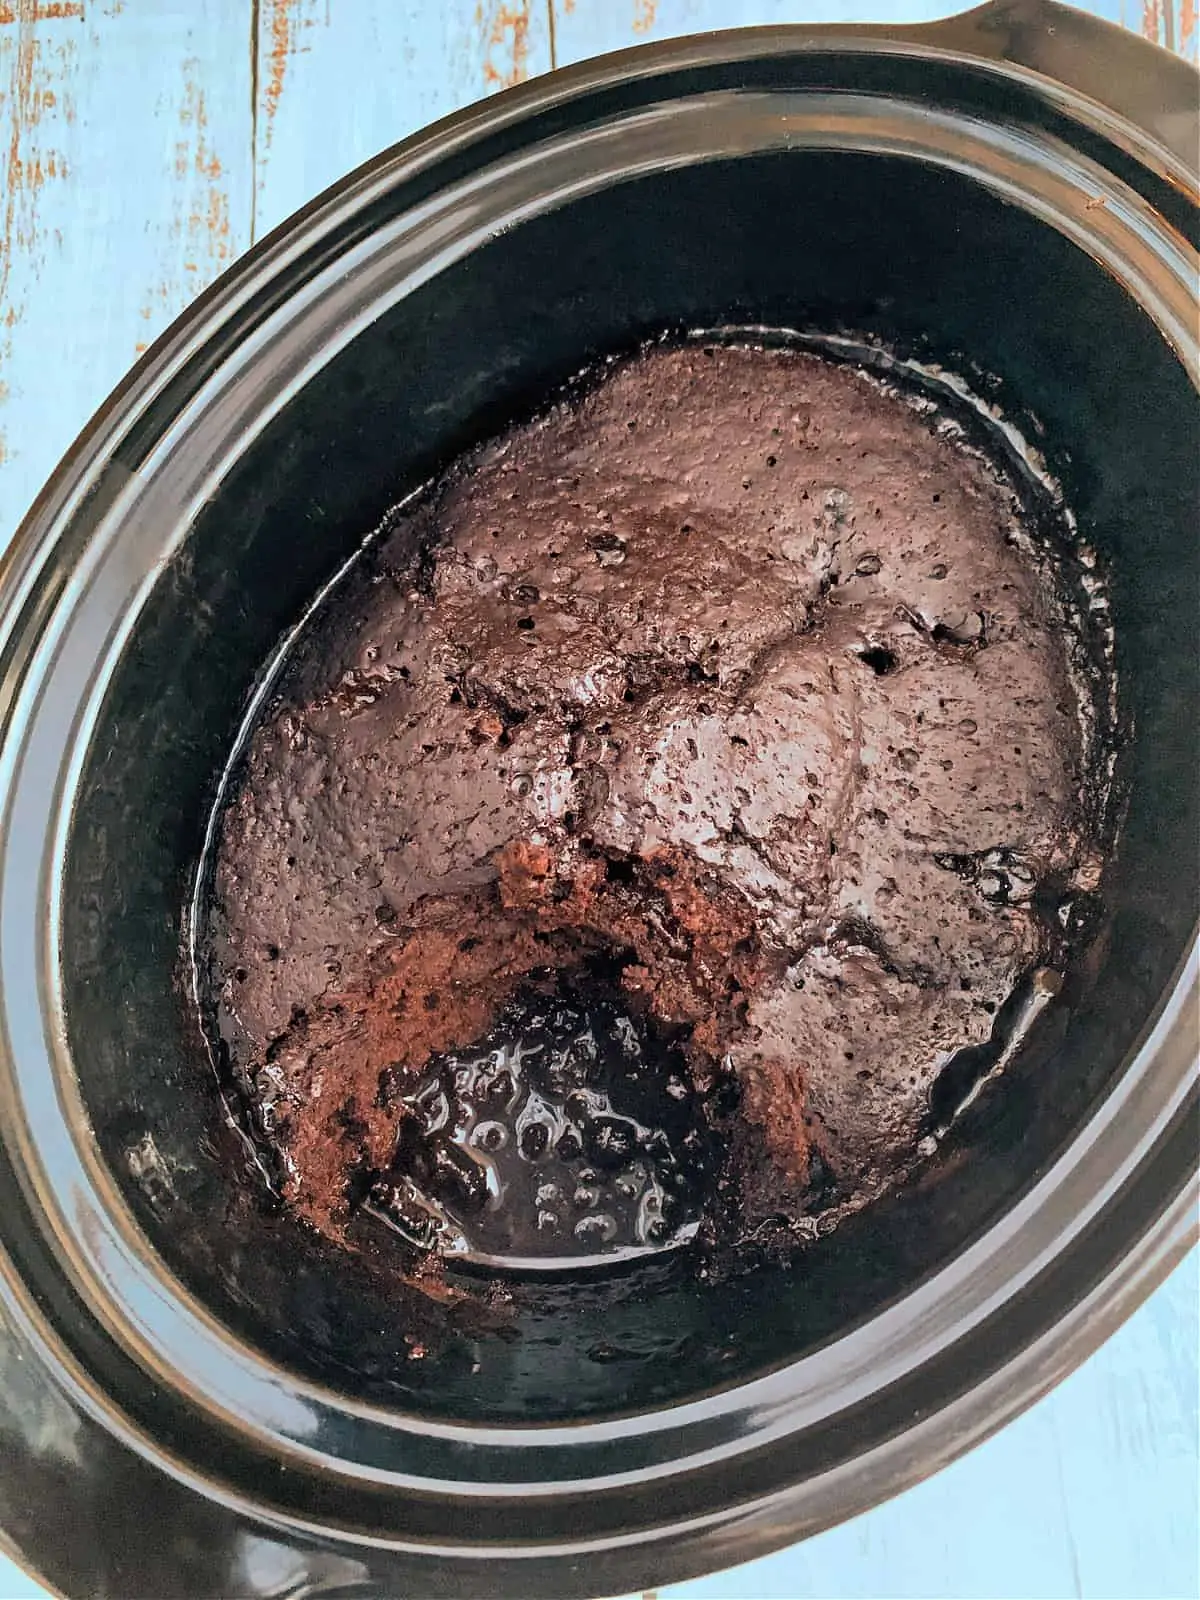 Chocolate sponge pudding with chocolate sauce in slow cooker pot, one portion removed to show the sauce.